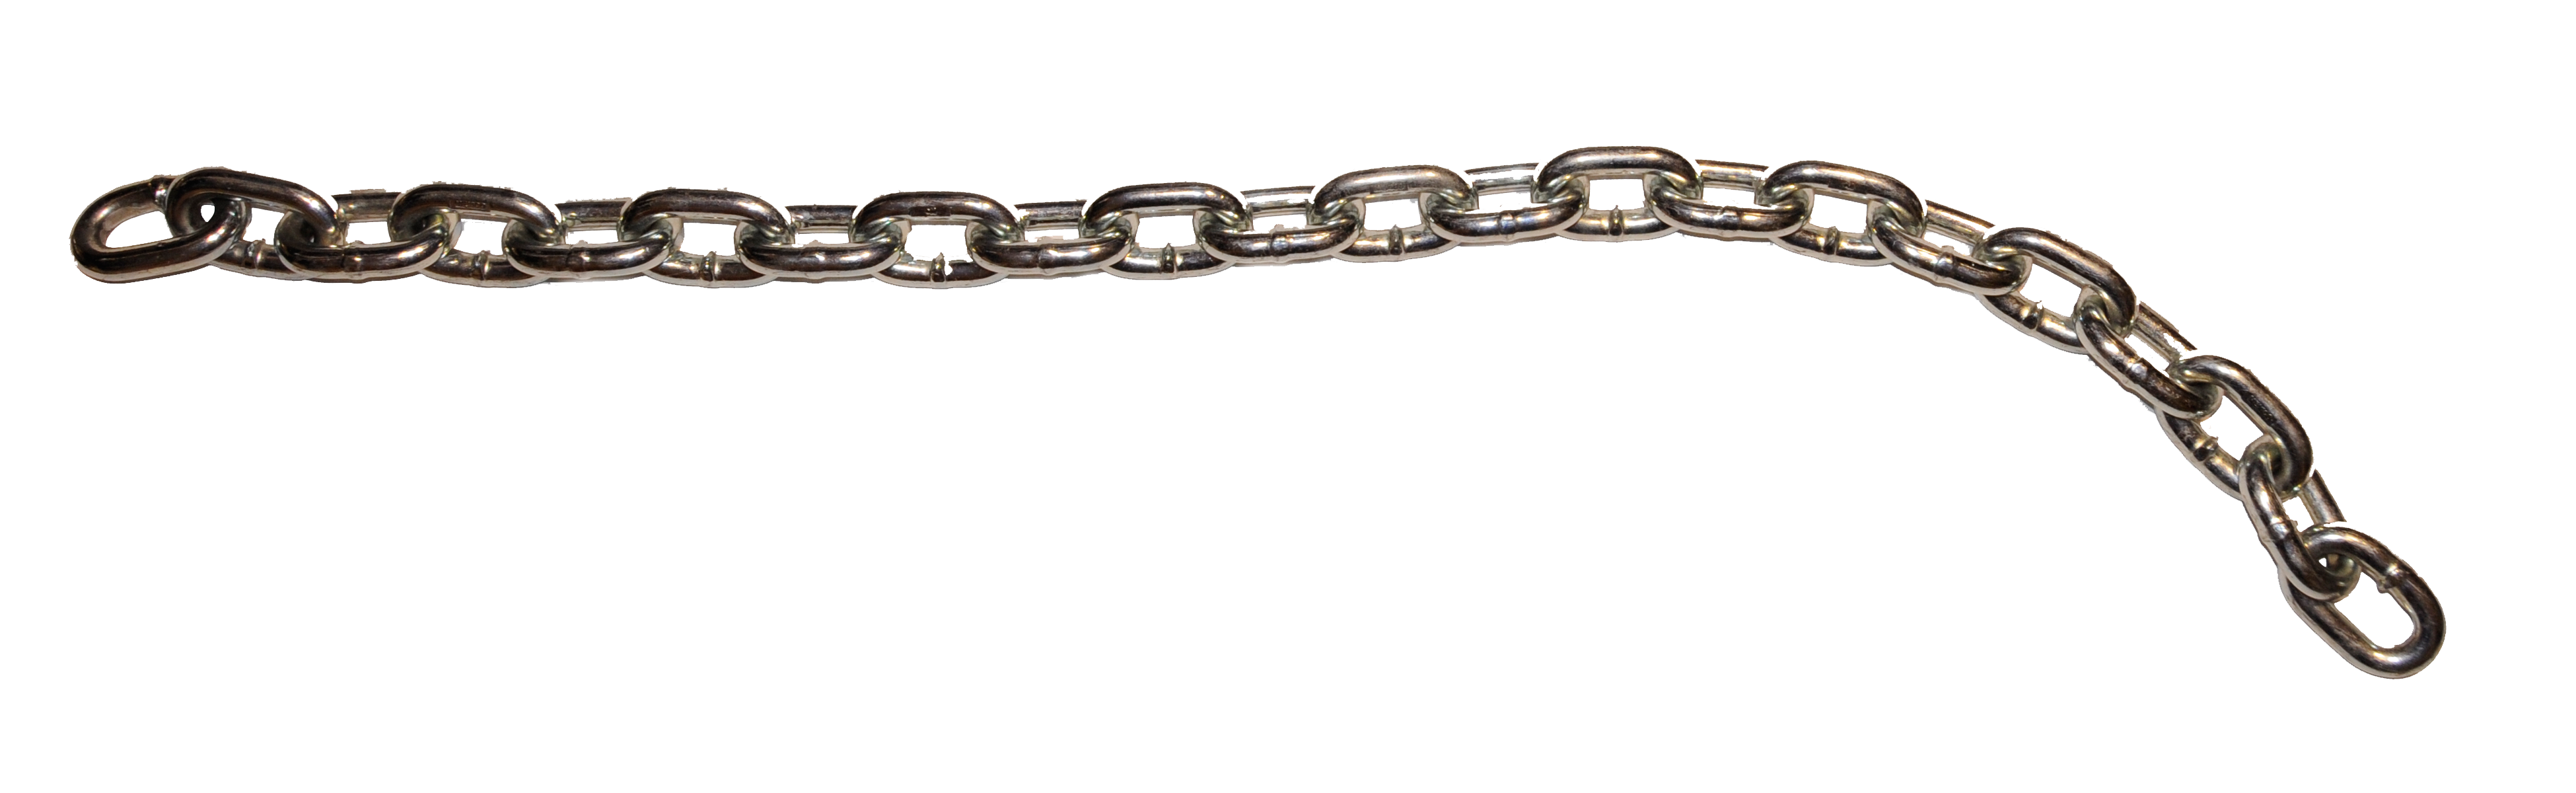 Irons Chain Network Link Branches PNG